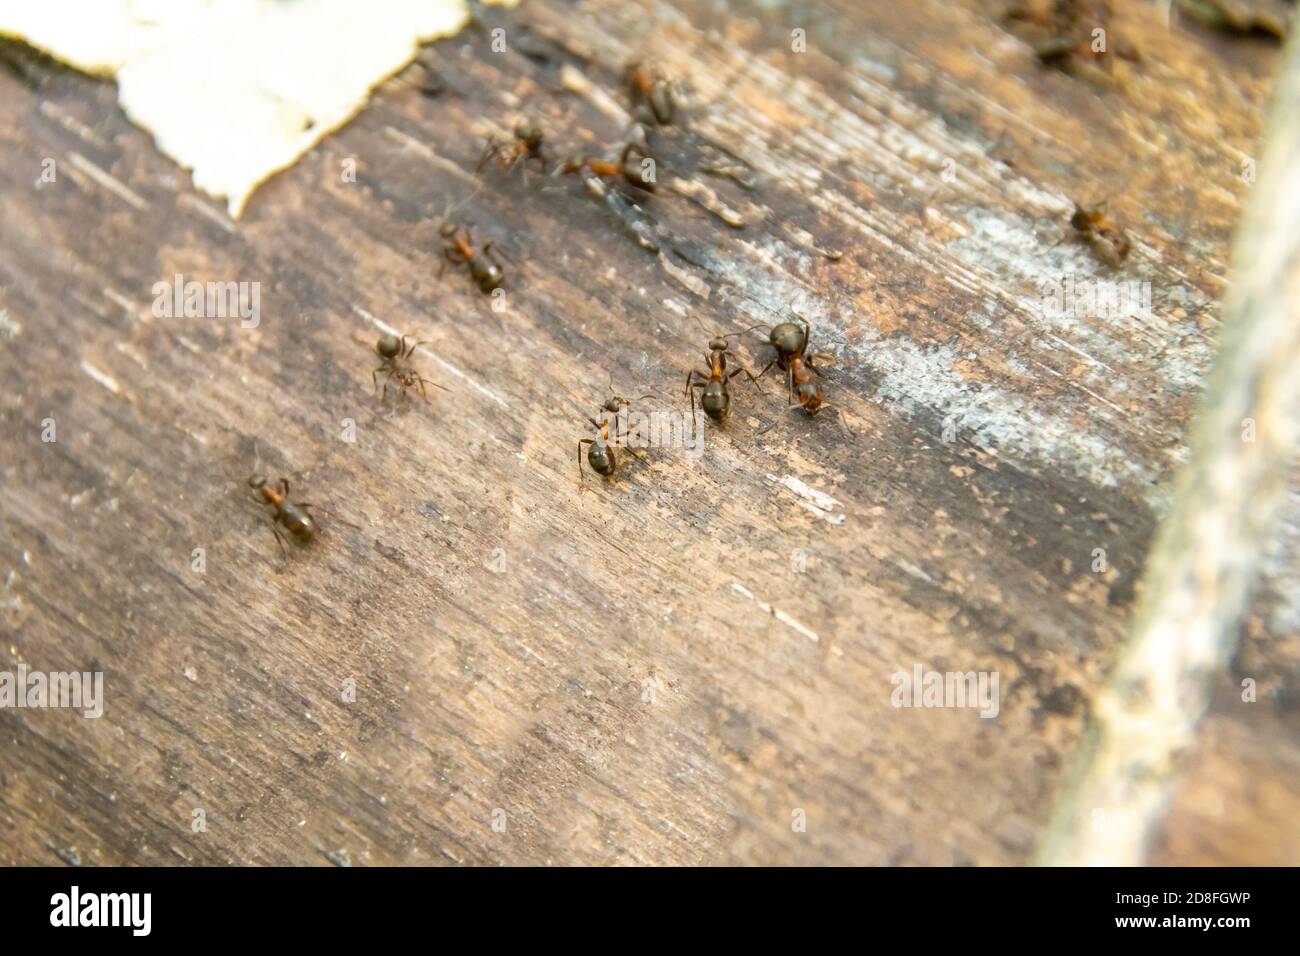 large forest ants move along a log, selective focus Stock Photo